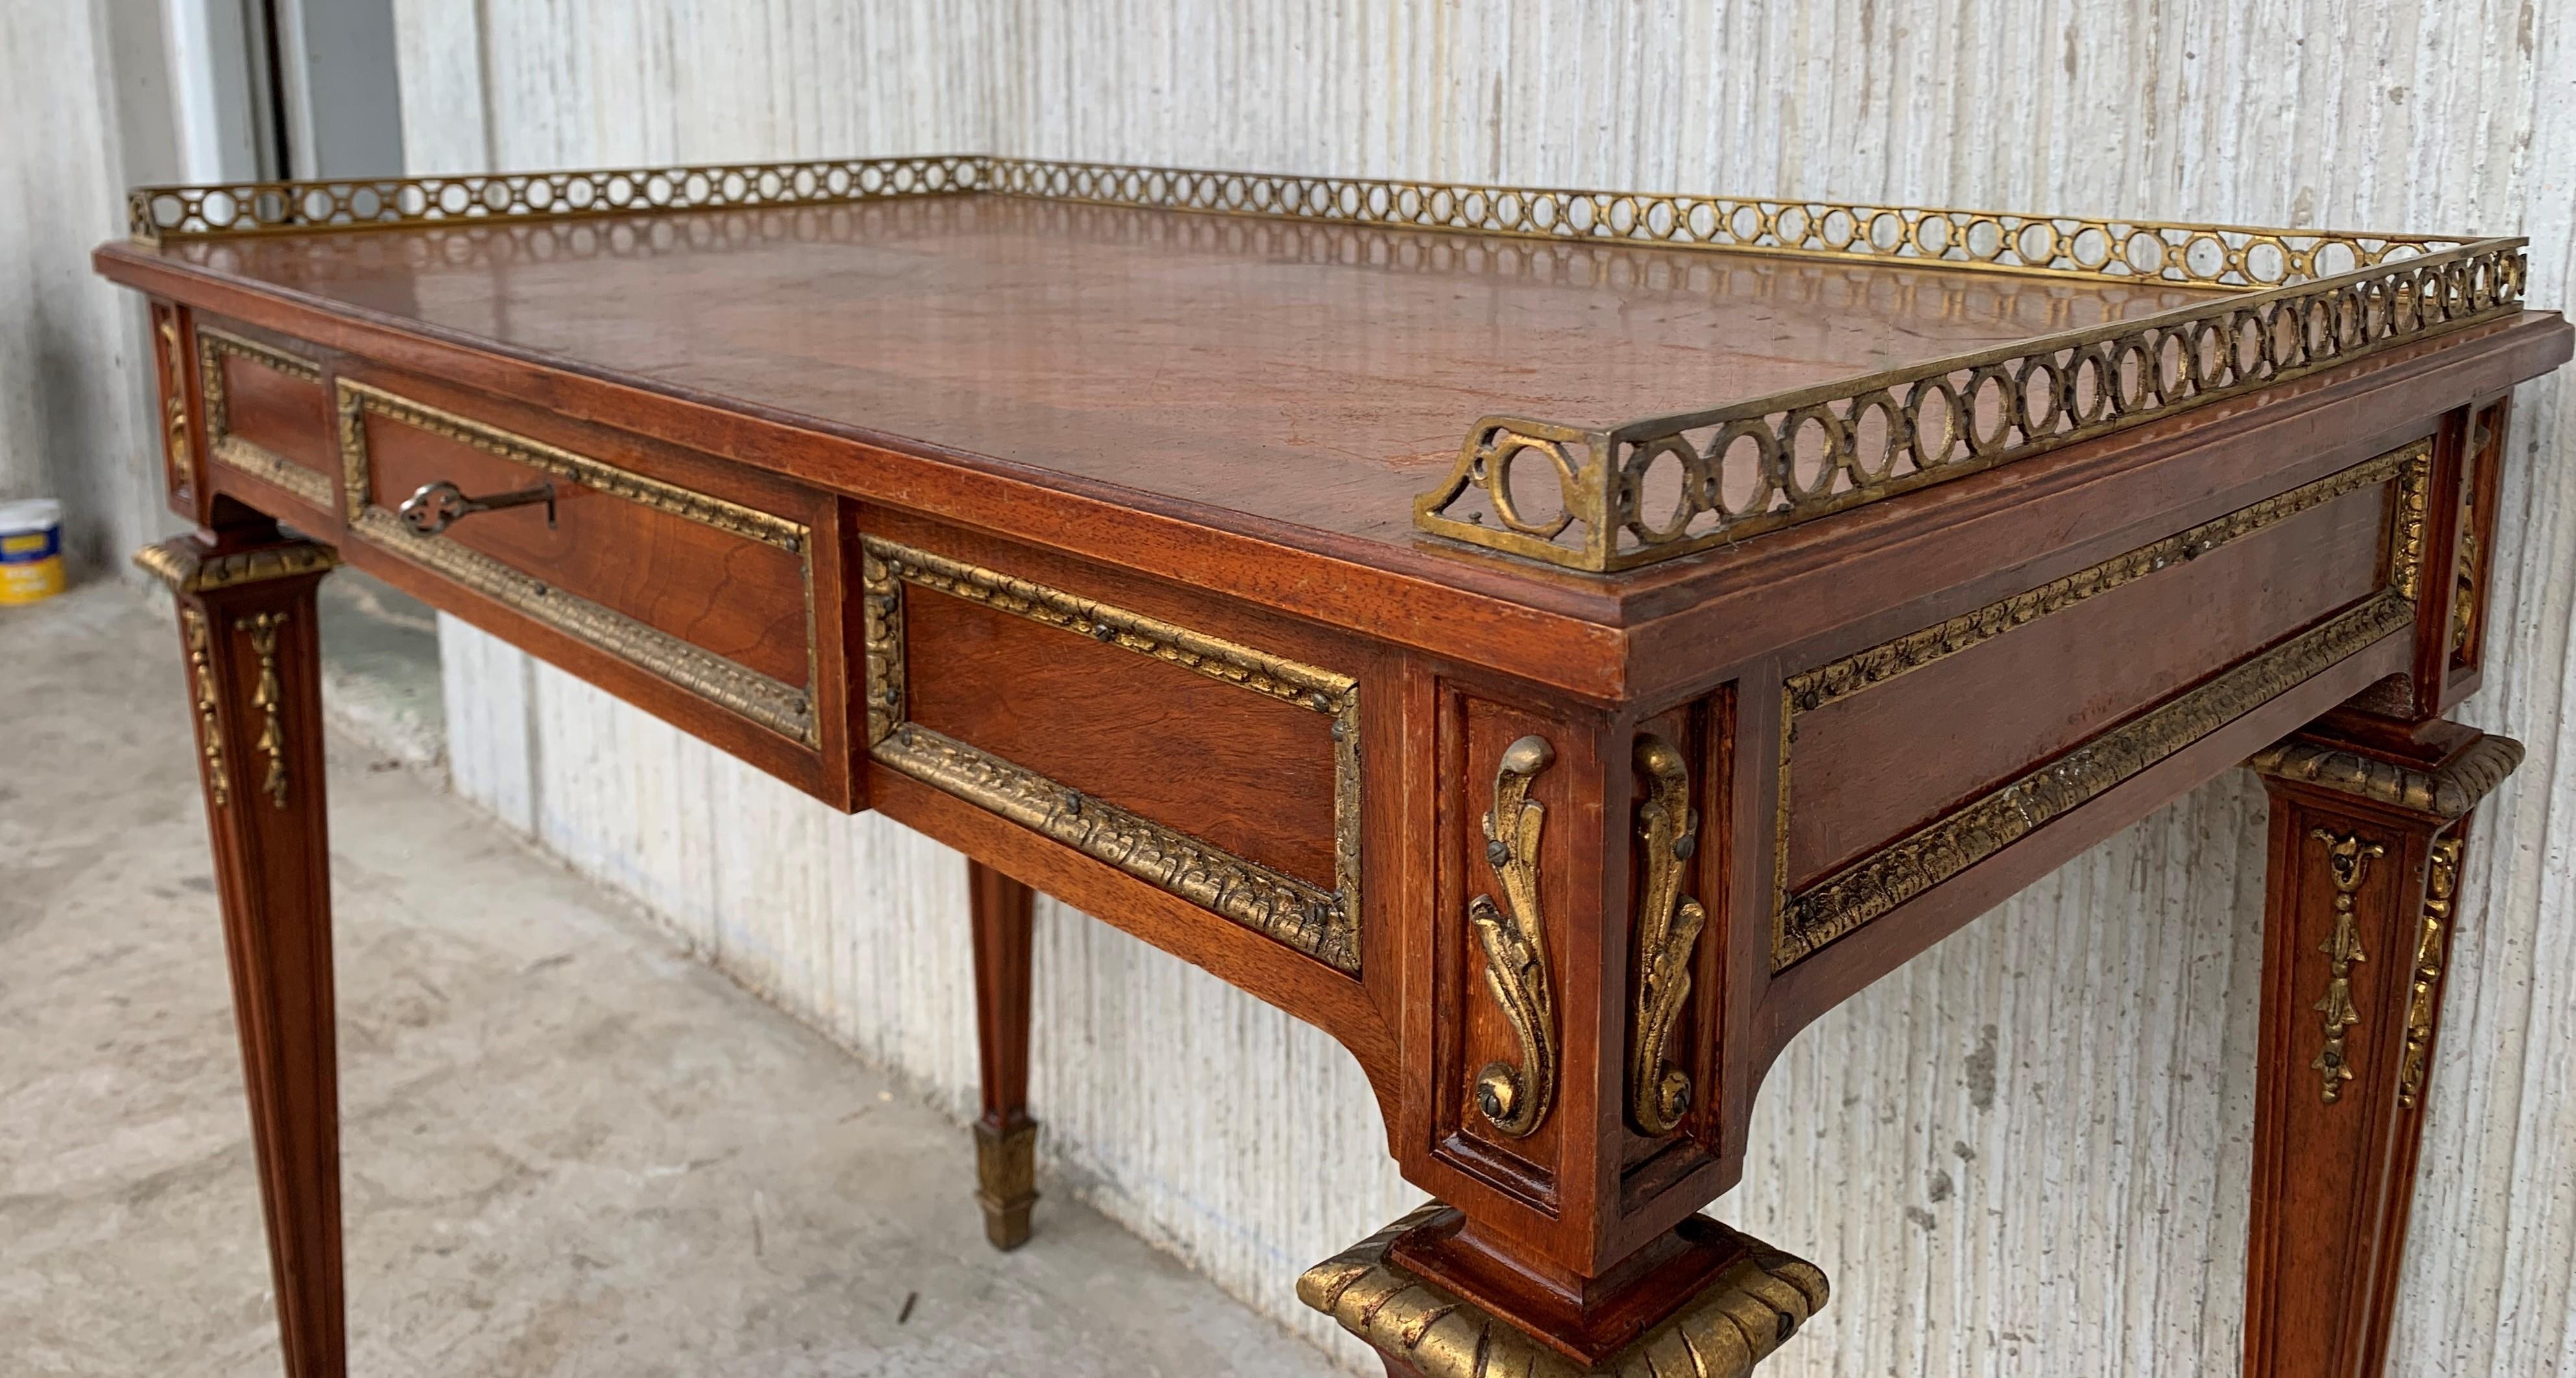 This important writing table is after Jean-Henri Riesener, perhaps the most important furniture maker working in Paris during the reign of Louis XVI. The desk thus demonstrates a curious history: it is a desk in a distinctly French style, after